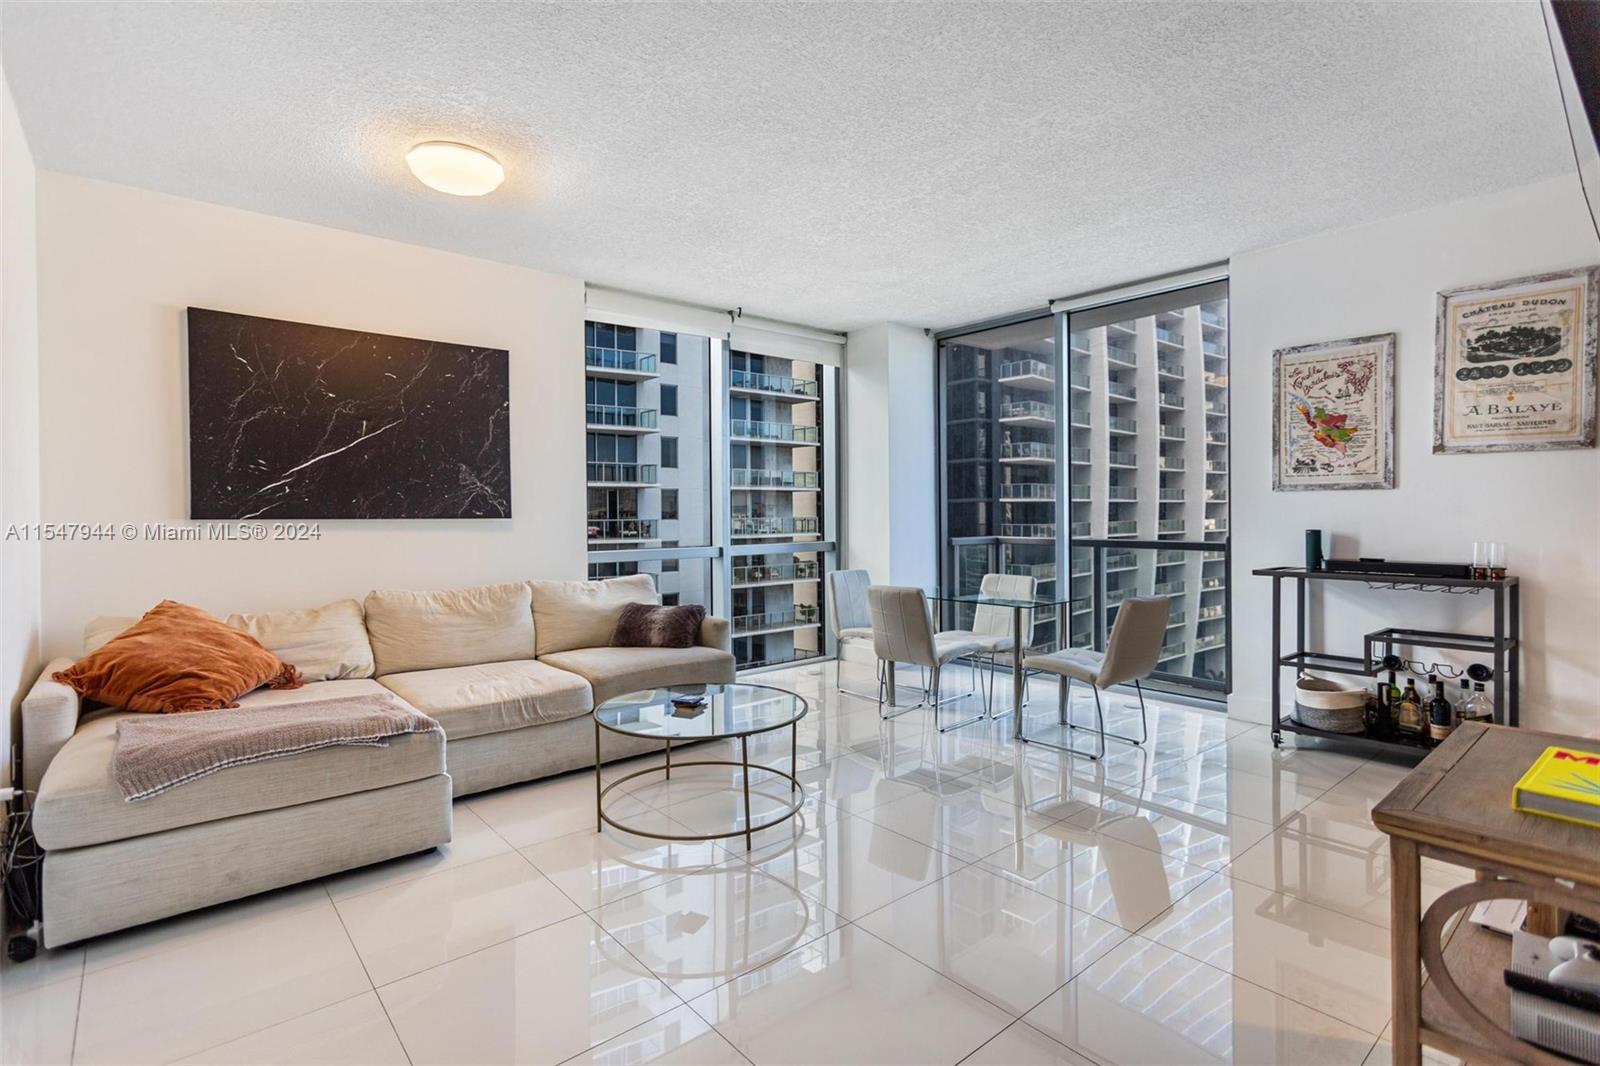 Welcome to the absolute best deal for a spacious 2bed/2.5bath corner unit located directly in Mary Brickell Village and steps to Brickell City Center at 1060 Brickell. Features include, floor to ceiling windows, white porcelain tile floors, upgraded appliances, great views the city, skyline and pool. Additional features include: large master bedroom with walk in closet, large luxury master bathroom with separate shower and tub, spacious guest bedroom, additional half bath for guests and more. Have access to hotel style amenities including, pool, gym, spa, party room and more. Ideally located in the best location in Brickell steps to all of the shops in Mary Brickell Village, walking distance to City Center, close to metro mover, highway and airport